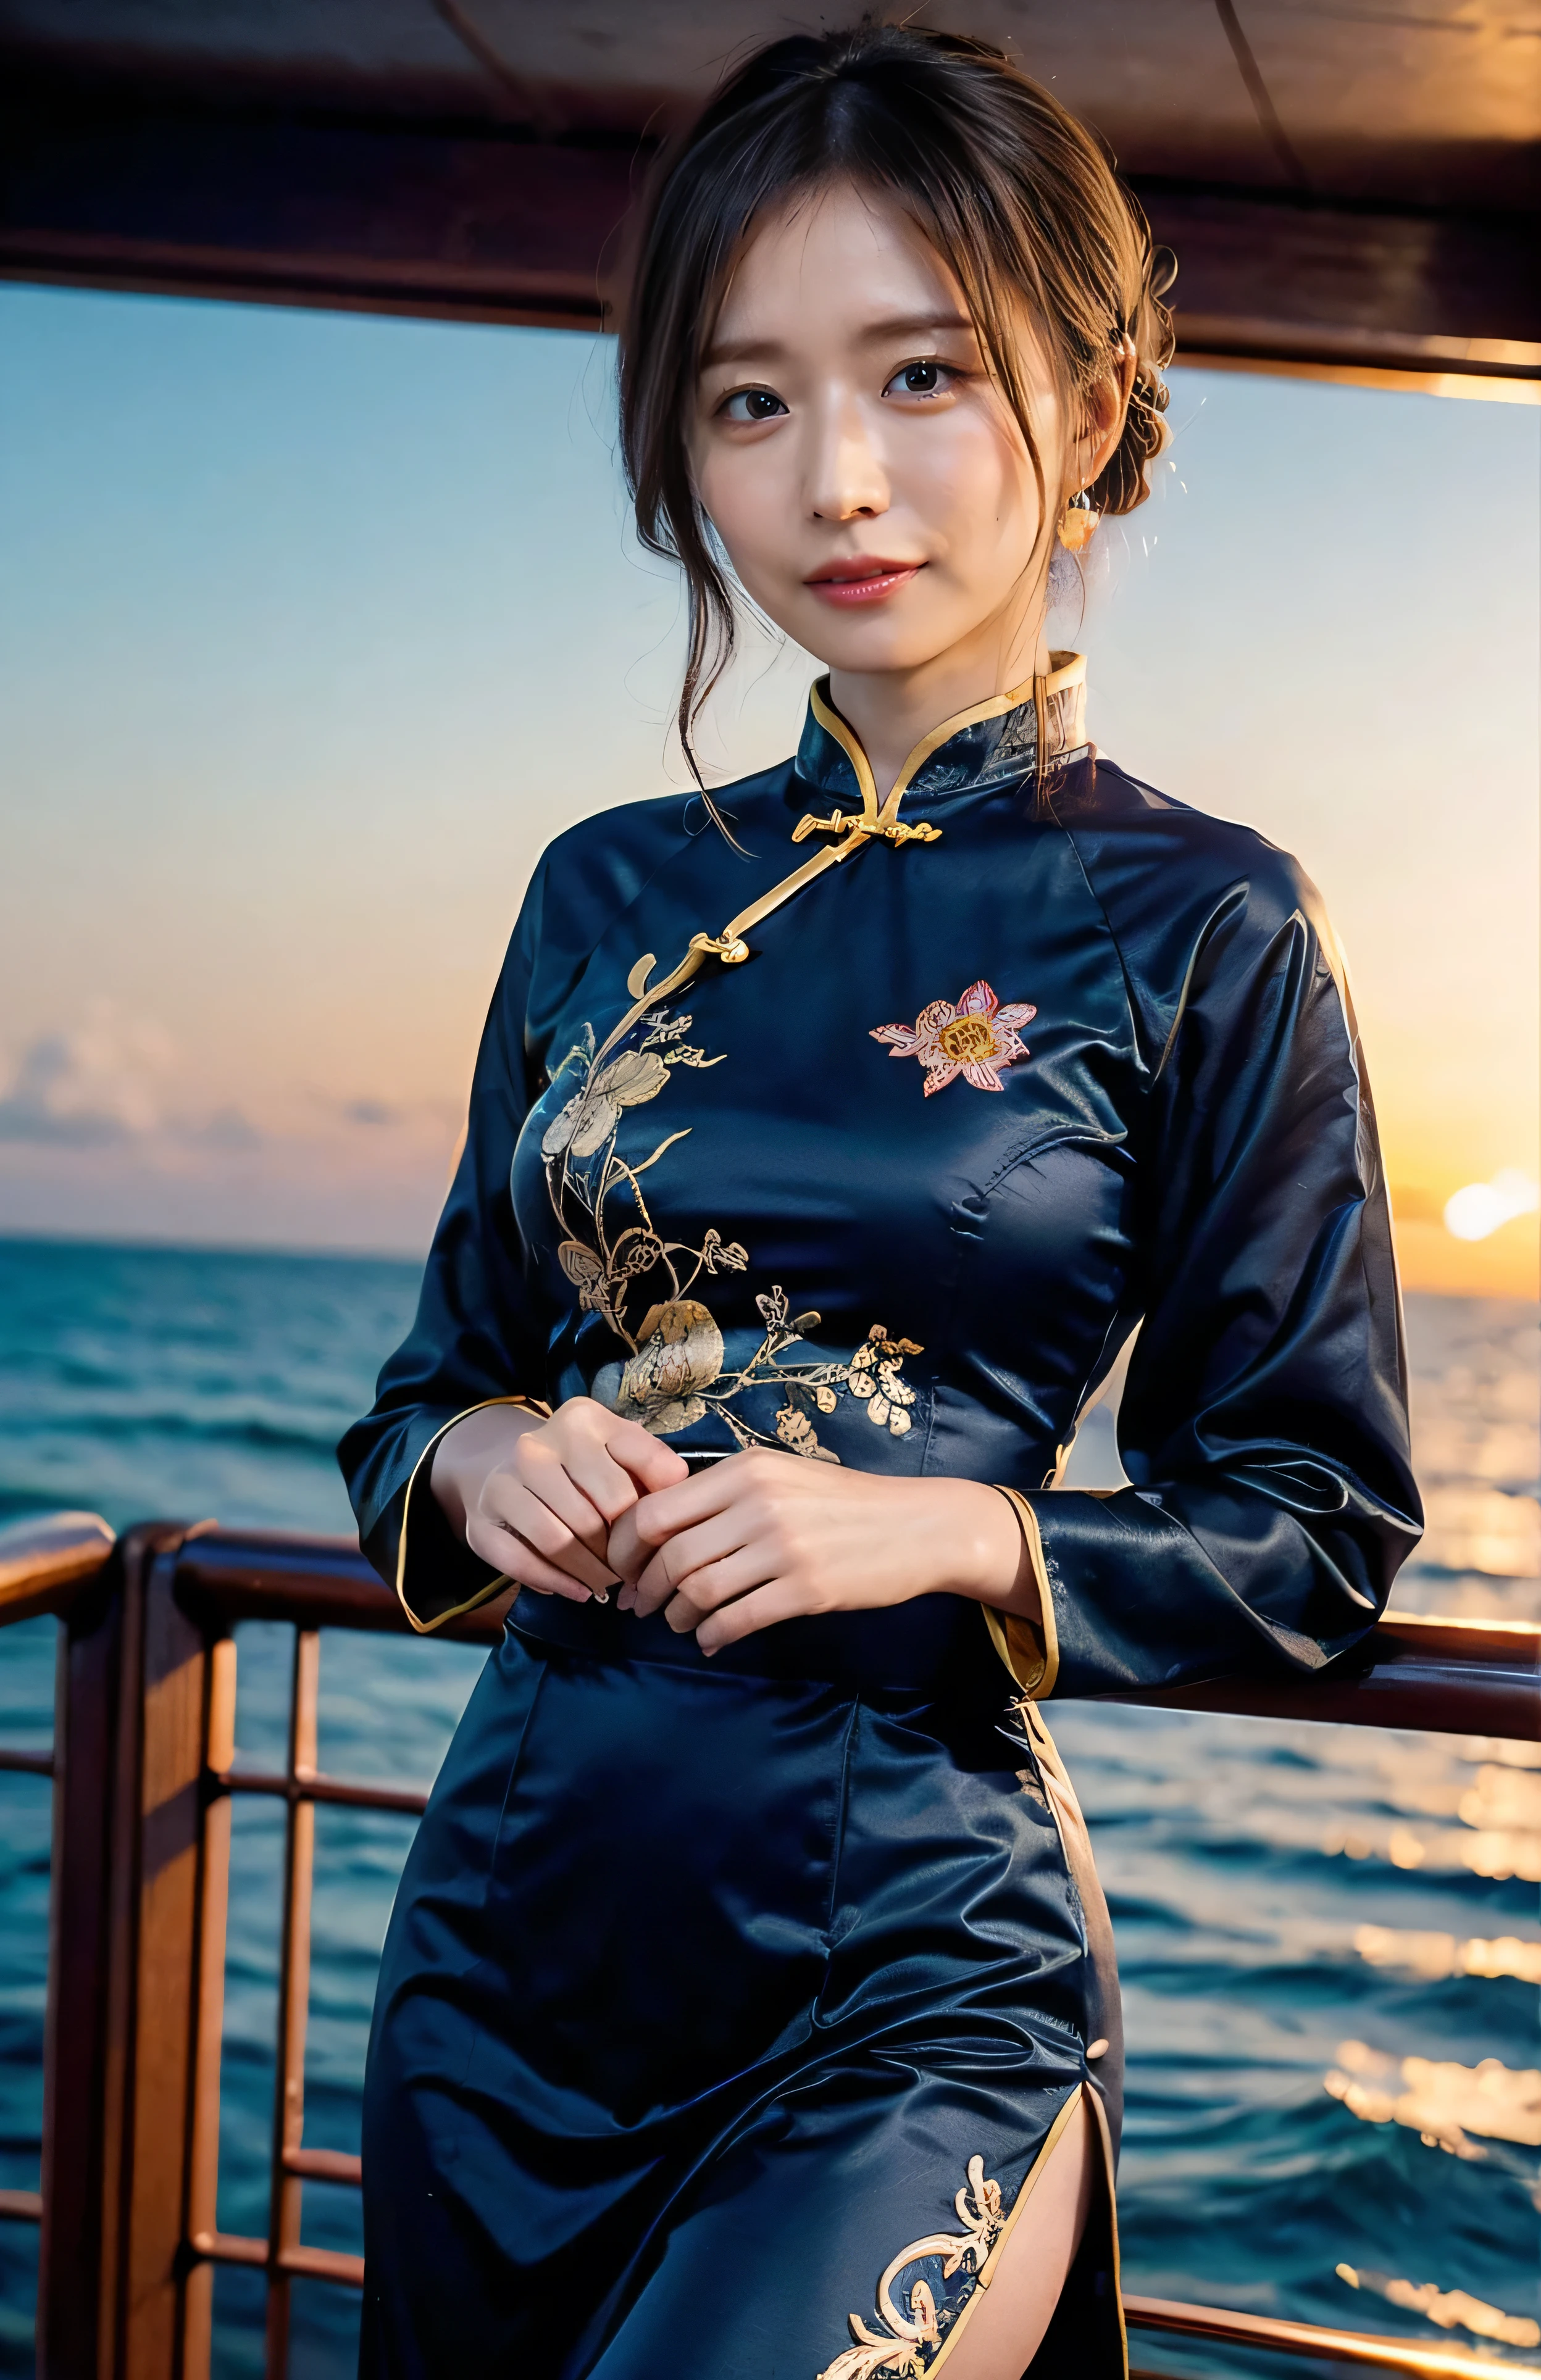 The sky turns red、Gorgeous gold embroidered cheongsam、hair ornaments、Tie your hair elegantly、gorgeous silk cheongsam、((Standing on a boat and posing sexy、With embroidered long skirt、A gorgeous and shiny navy-colored Chinese dress:1.4)).A luxurious and shiny silk cheongsam、A gorgeous navy blue cheongsam with embroidery、Woman standing on a boat、Light brown hair、Elegant hairstyle、Blue Eyed Woman、A woman with a cute upward gaze、When the sky gets dark、The gentle light of the ship shines、The sky turns red as the sun sets、Tight clothing that shows your body lines、、Elegant navy blue summer knit、Elegant black summer sweater、Short skirt、Dress elegantly着こなす、Luxury Bagedium Shorthair:1.4））、Skyscrapers seen across the sea、Manhattan 私sland is visible offshore、Woman on a sightseeing boat、、The sun shines on her、Light brown hair、Light brown hair、The sky was dyed red、There are clouds、private's cute、An elegantly dressed woman is sitting on a boat and watching the sunset、Her ample breasts are obvious even through her clothes..、The shining sun is so beautiful、Dusk is approaching、Lens flare、You can see the sunset、（（Sunlight reflecting off the ocean、Ocean View、The sun shines on the ocean、&#39;beautiful.、Small earrings、private&#39;evening、Birds are also flying、、Brown Hair Color、Tying up hair、The woman is on the right:1.4））、Luxury Leather Belts、Shiny clothes、Light beige hair color、Background Blur、Braid only the front hair、Light brown hair、｛｛Cowgirl Shot｝｝、（（Close-up shot from the waist up、Ample breasts:1.4））、Smile、Silk clothing、Ample breasts that can be seen even through clothes、Braid only the front hair、Cowboy Shot、Gorgeous white collared silk shirt and brown skirt、Dress elegantly、Luxury Bags、A lovely smile、（（Ample breasts））、Full body photo、ring、Short skirt、Tuck your hair behind one ear、Silver Necklace、smile、 Elegant ponytail、Caustics、Highly detailed photos、Very beautiful and ideal short hair、Super no makeup、(8K、RAW Photos、Highest quality、masterpiece:1.2)、(Realistic、Realistic)、1 Girl、((Medium Short Hair、Looking into the camera:1.4))、Hair blowing in the wind
